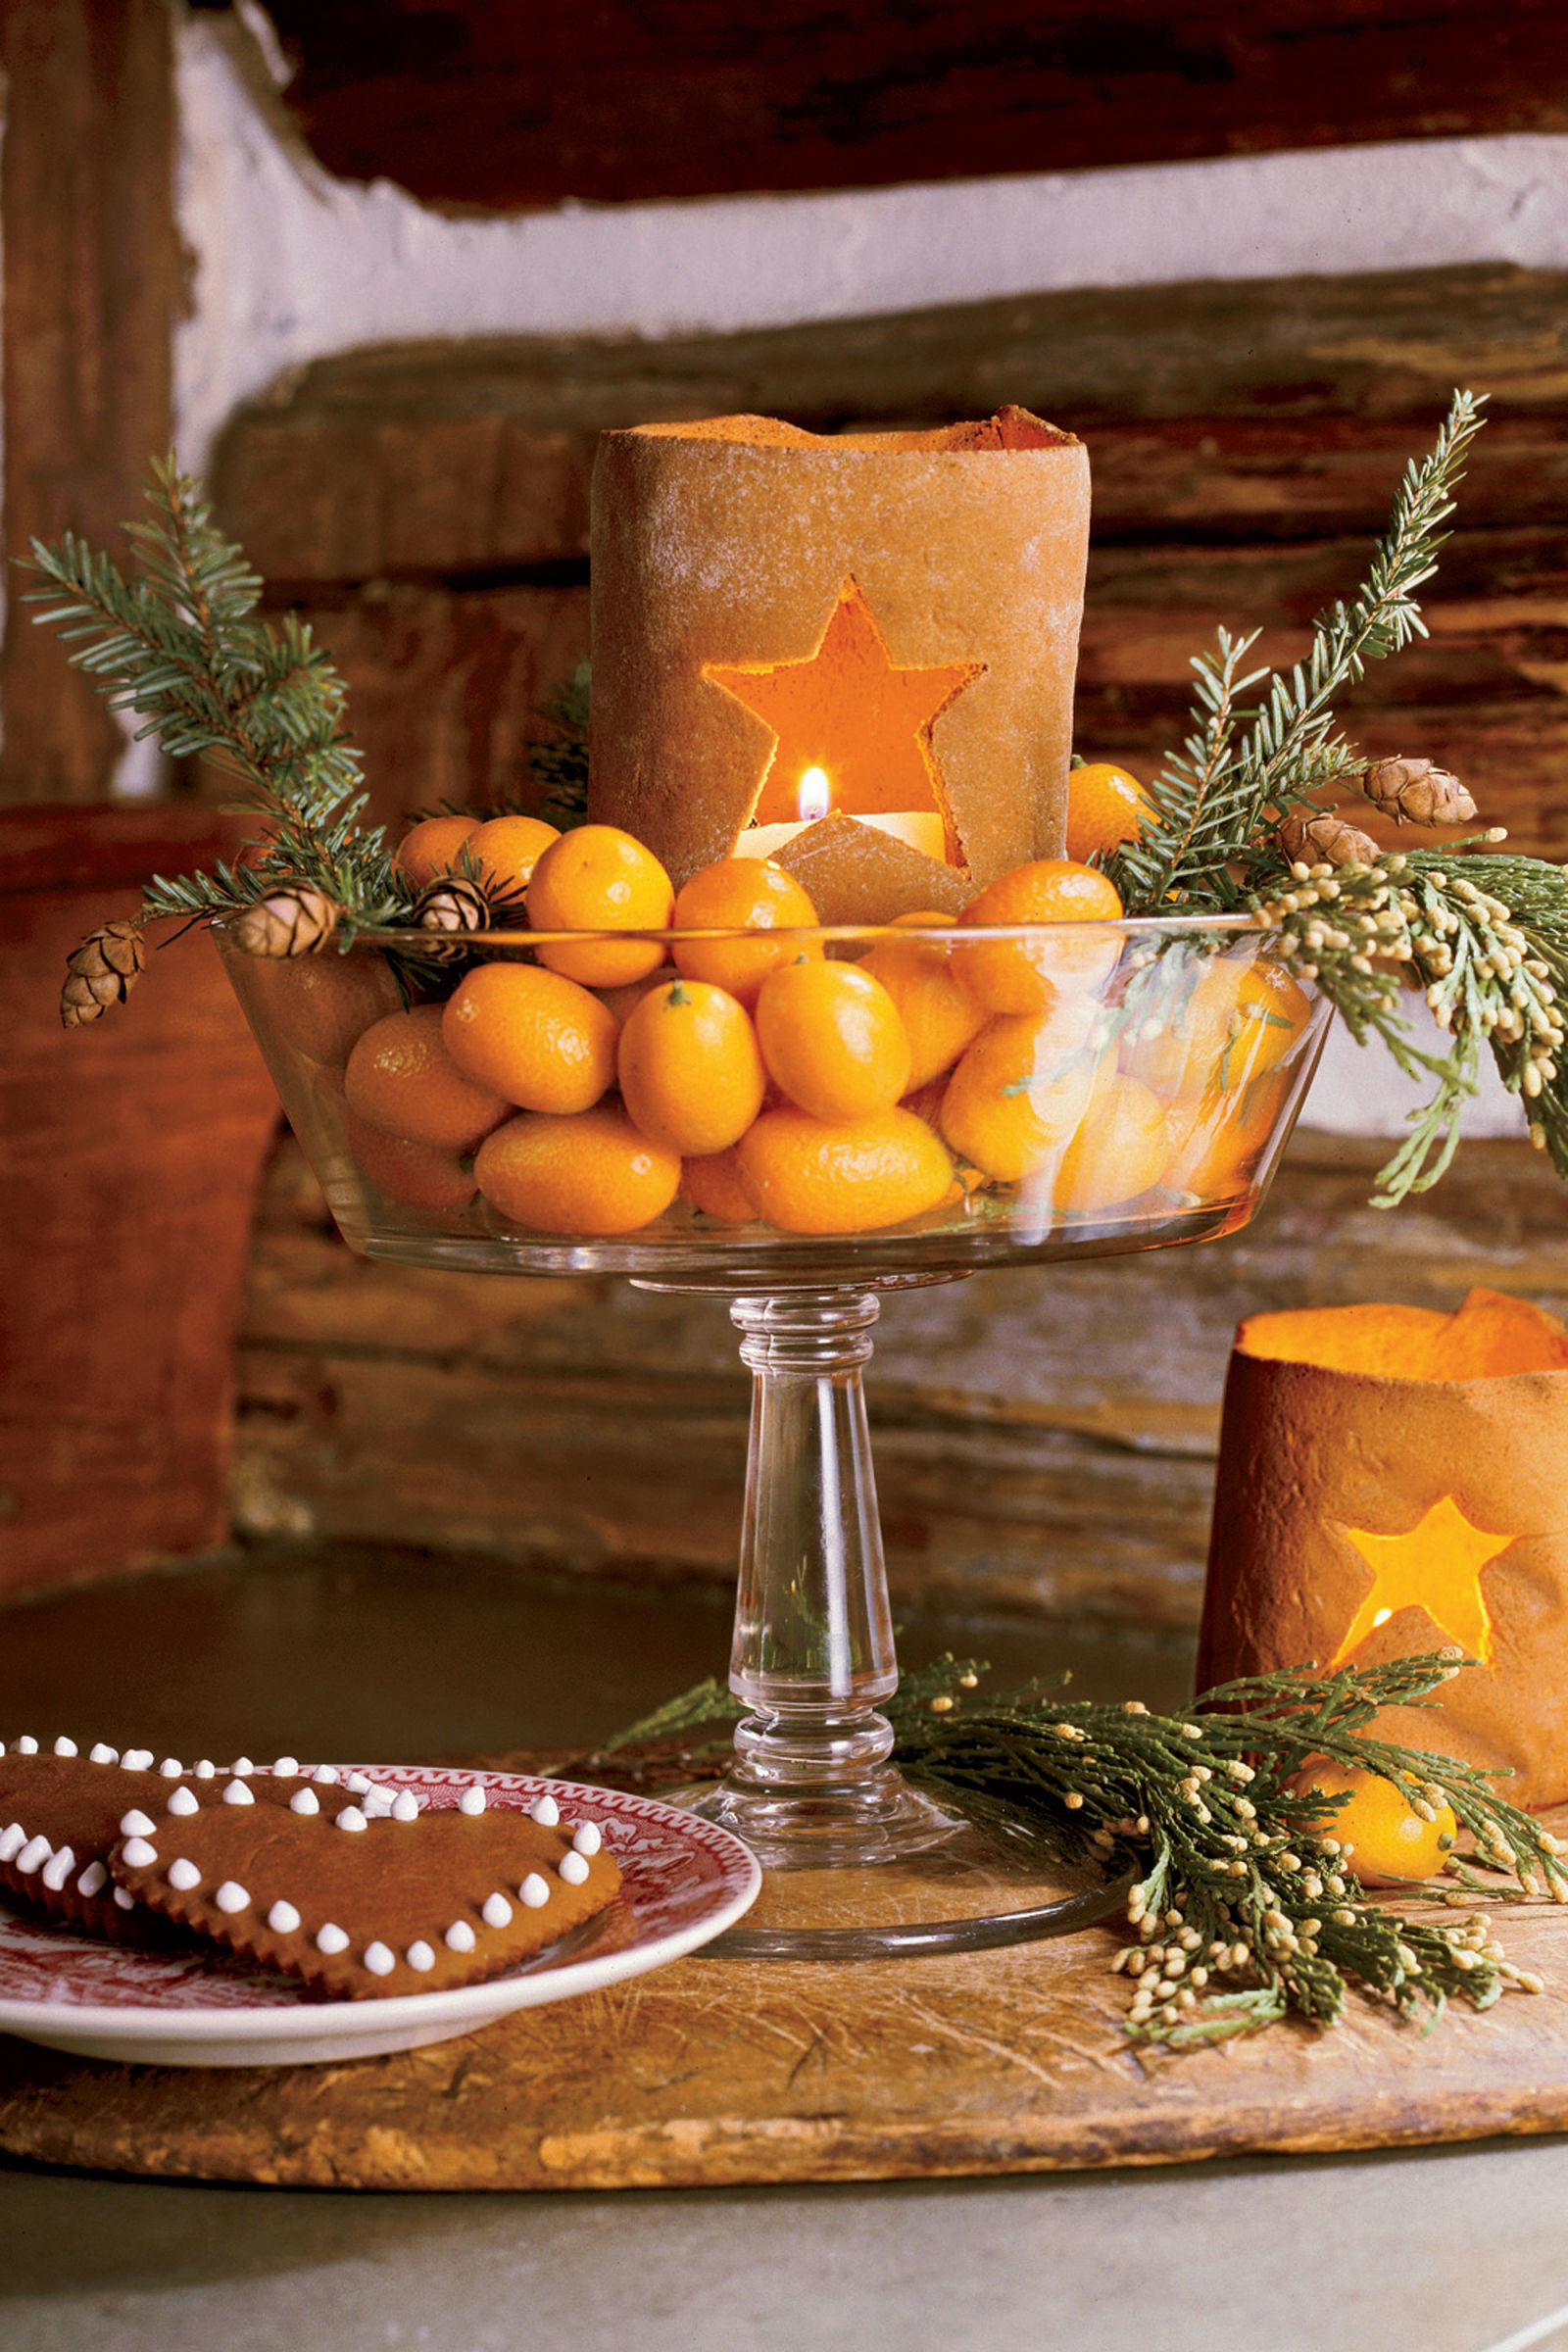 DIY Christmas Centerpieces
 Decorate The Tables With These 50 DIY Christmas Centerpieces